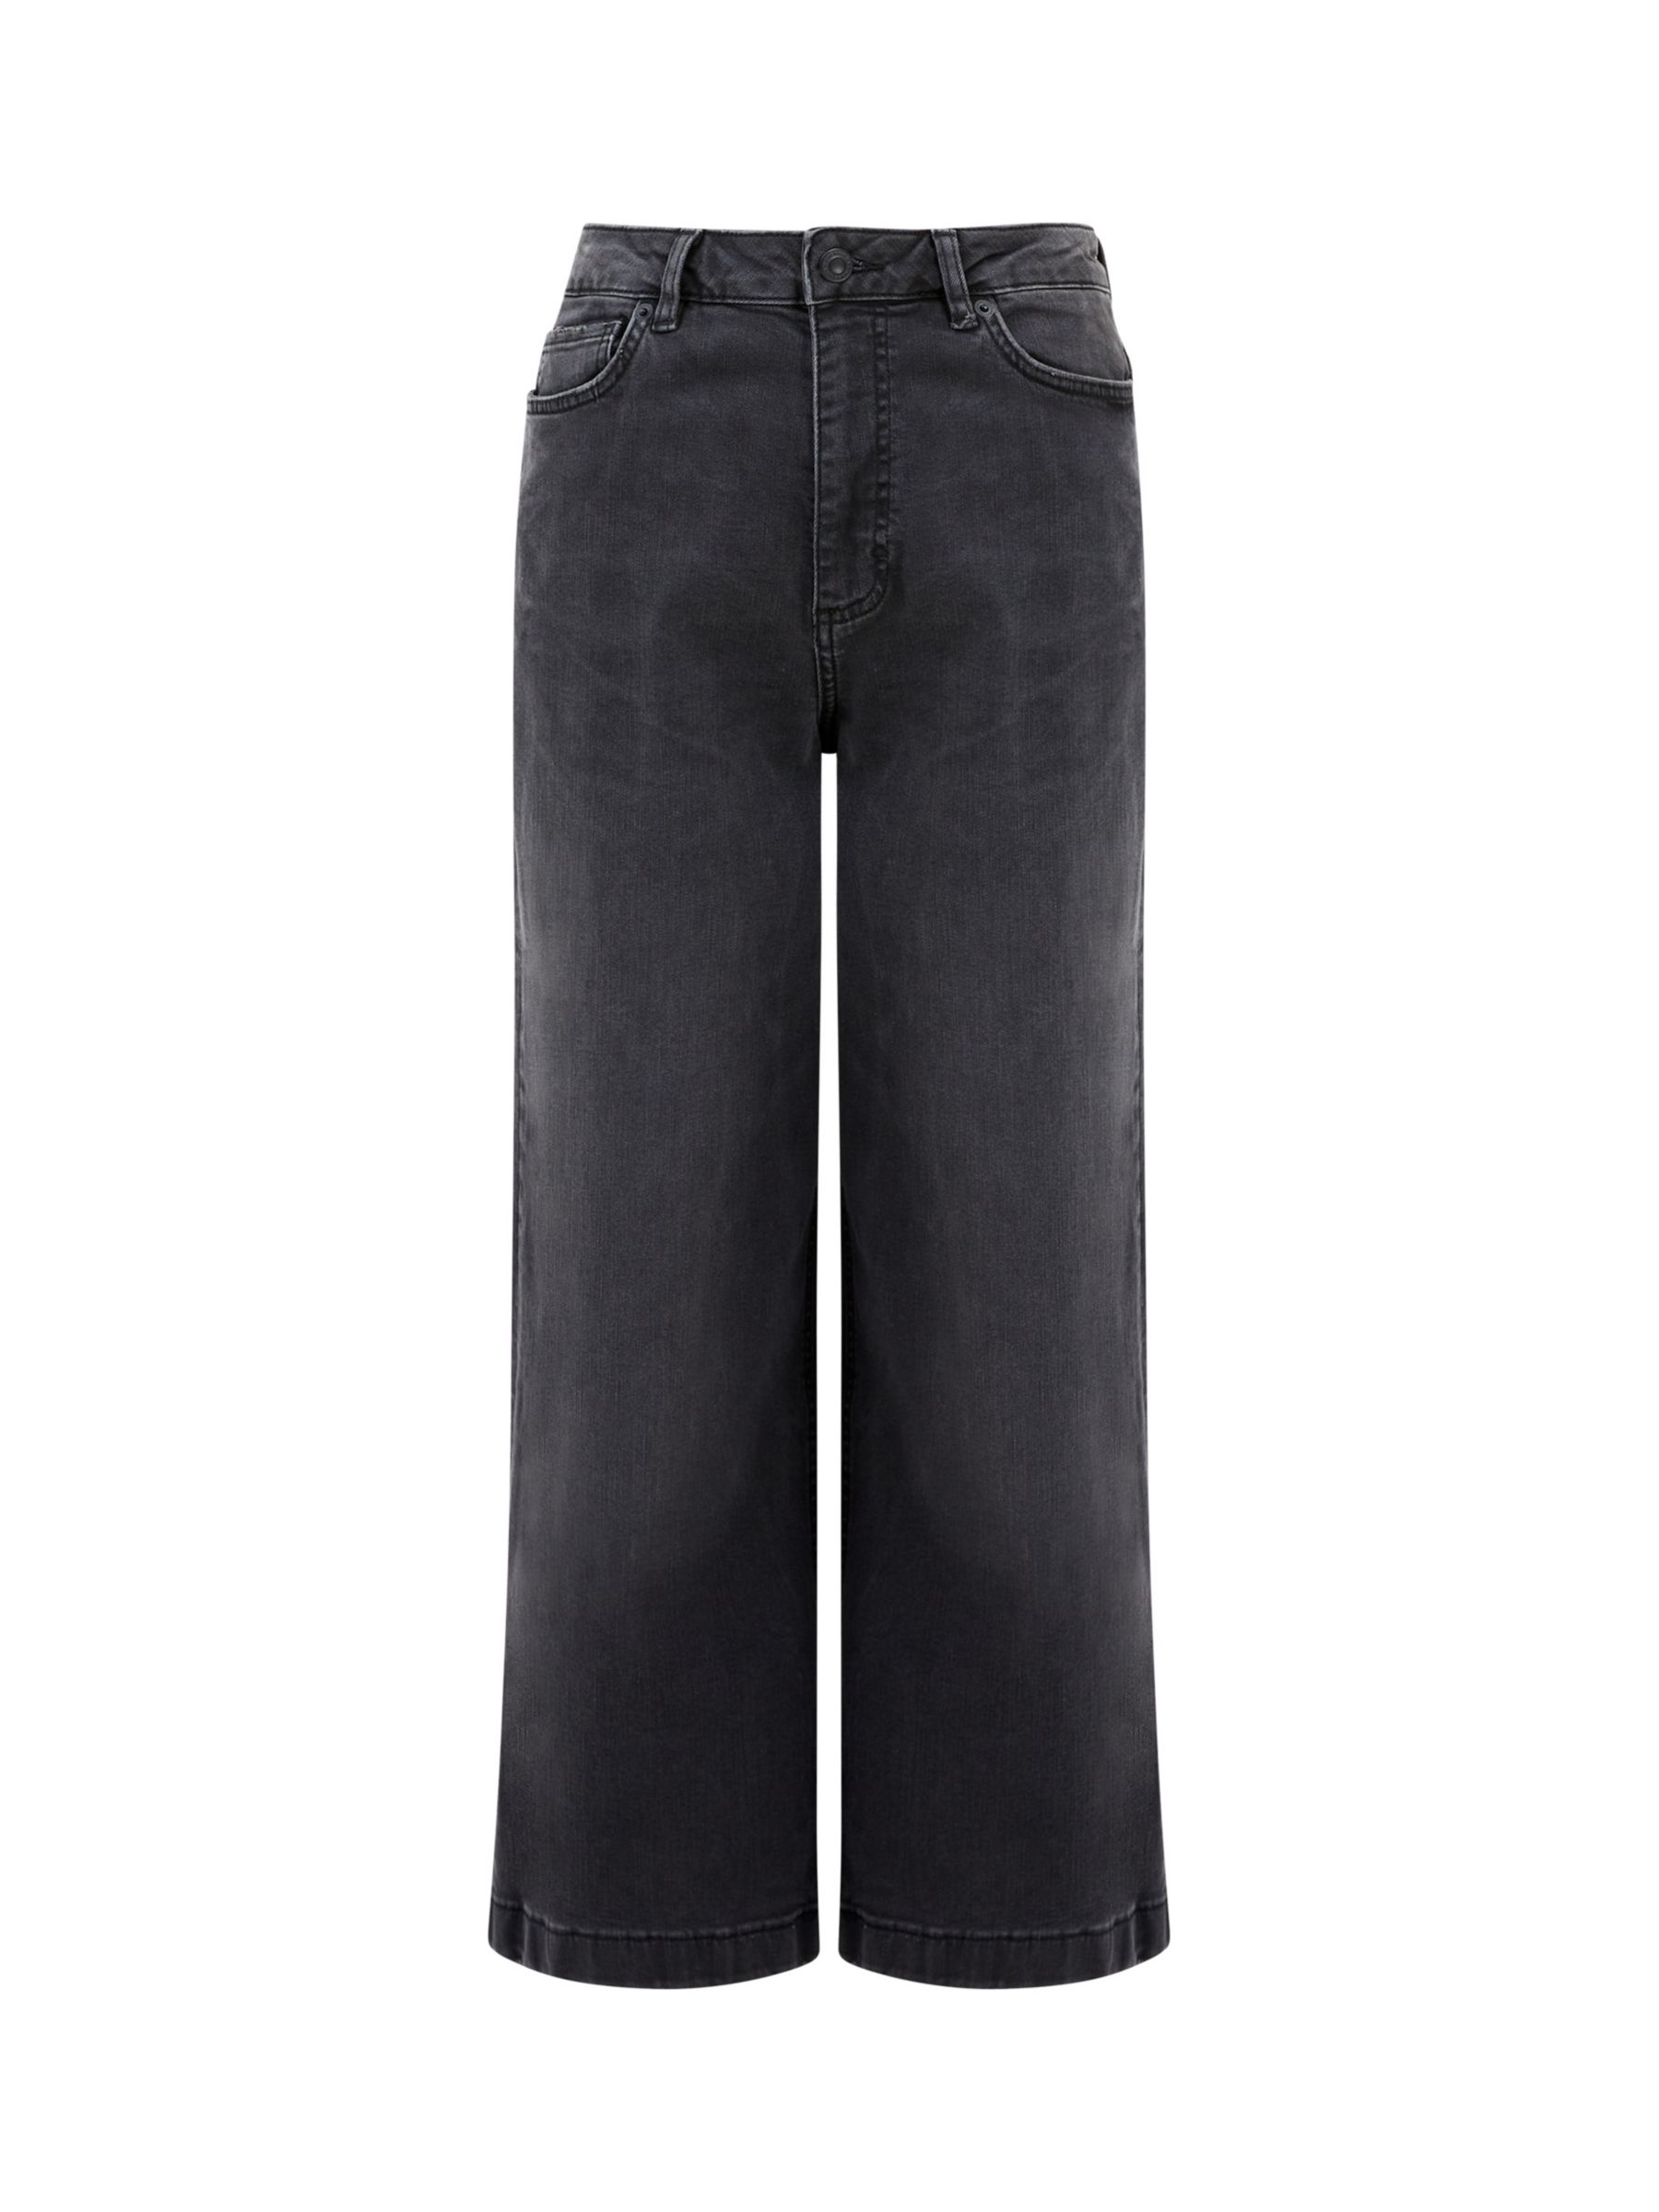 French Connection Stretch Wide Culotte Trousers, Black at John Lewis ...